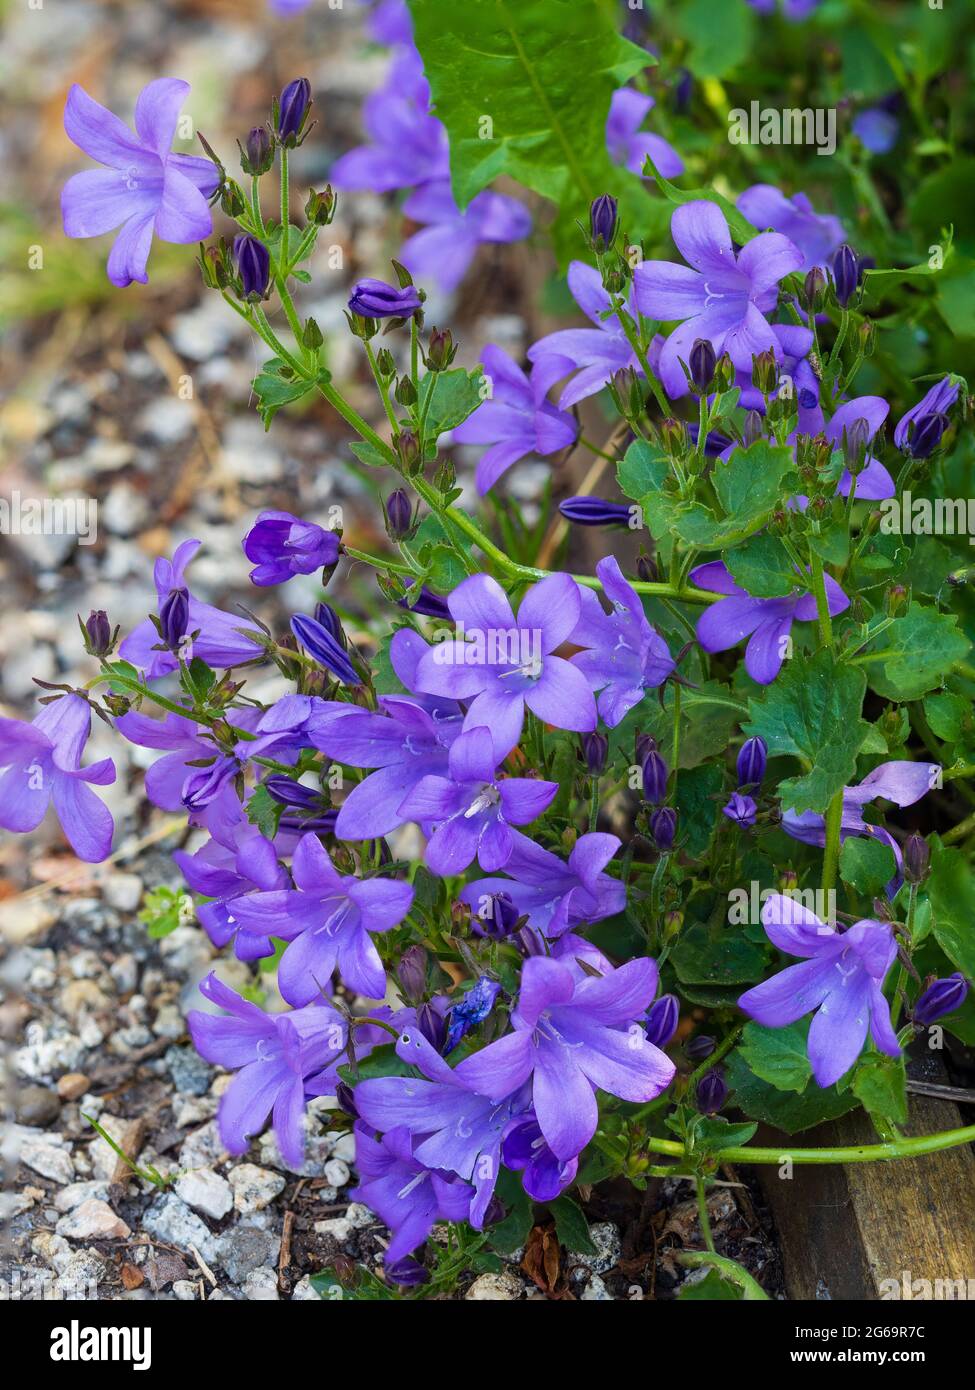 Early summer carpet of the small blue flowers of the  Adriatic bellflower, Campanula garganica 'Mrs Resholt Stock Photo